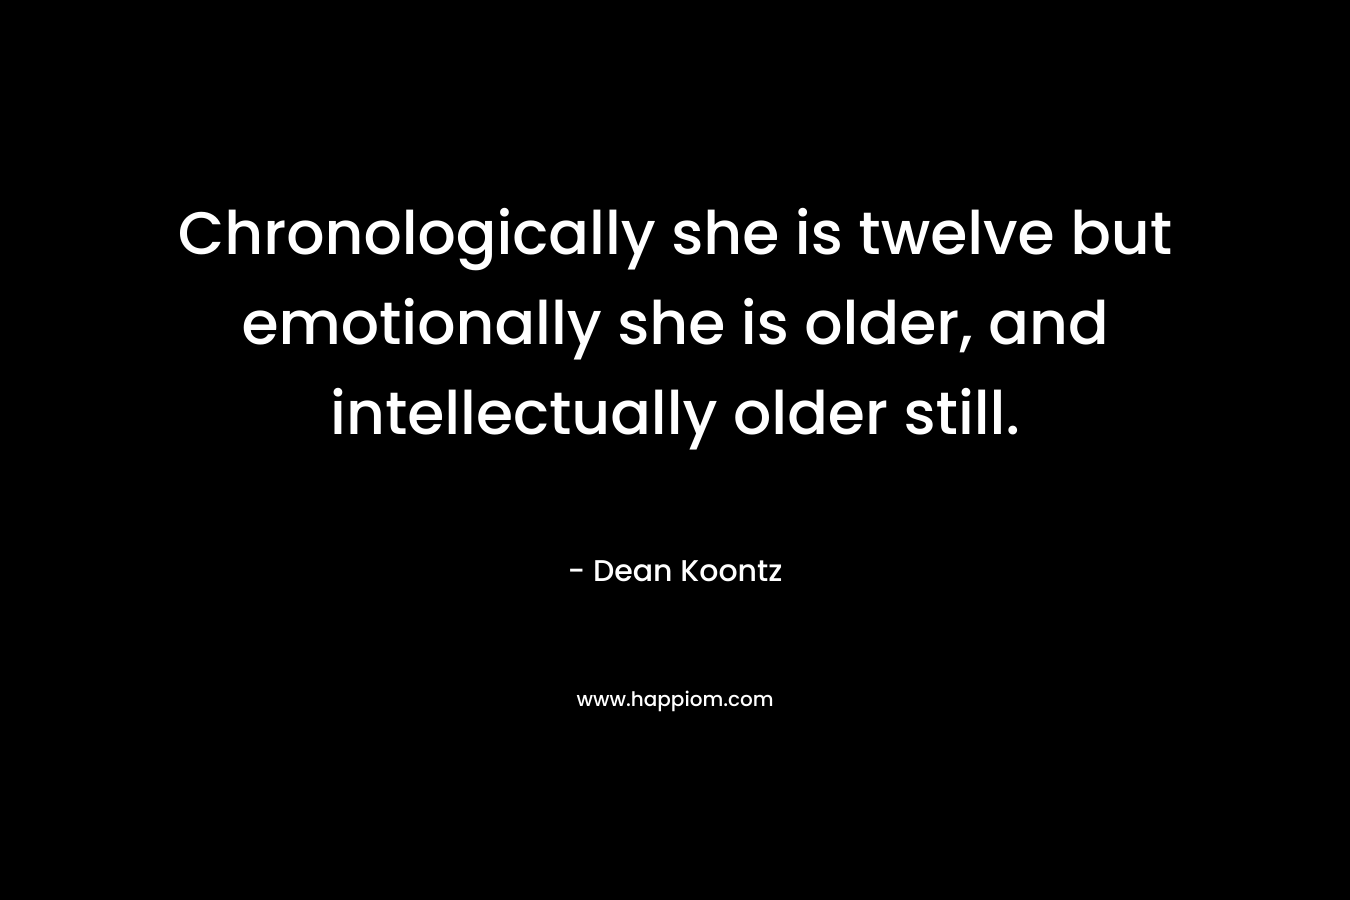 Chronologically she is twelve but emotionally she is older, and intellectually older still.